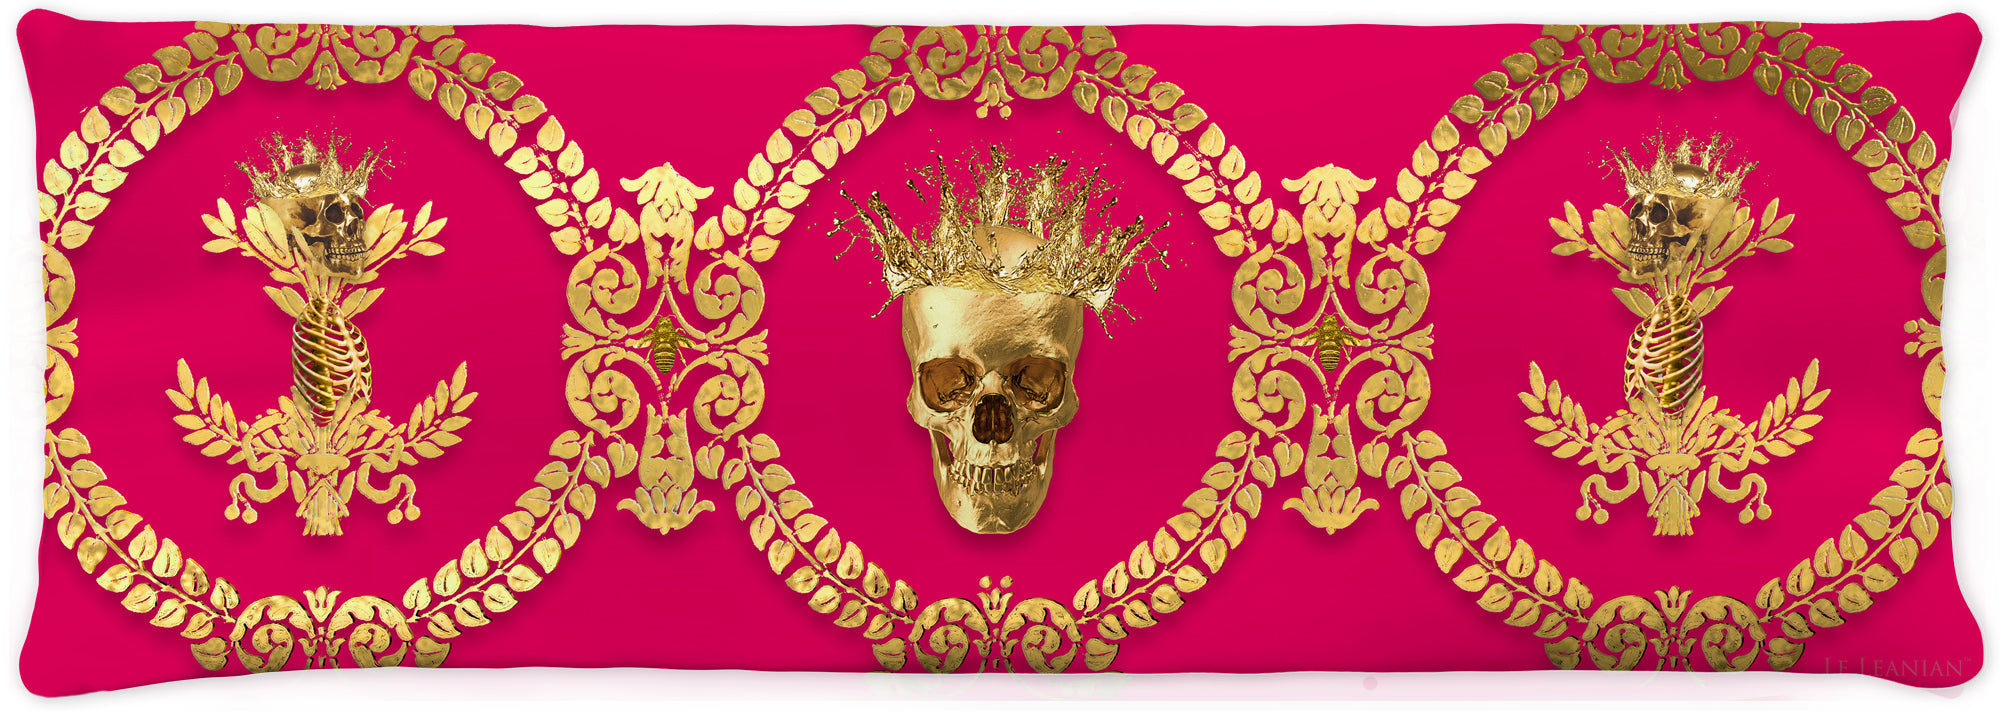 CROWN GOLD SKULL-GOLD RIBS-Body Pillow-PILLOW CASE- color FUCHSIA, PINK, HOT PINK